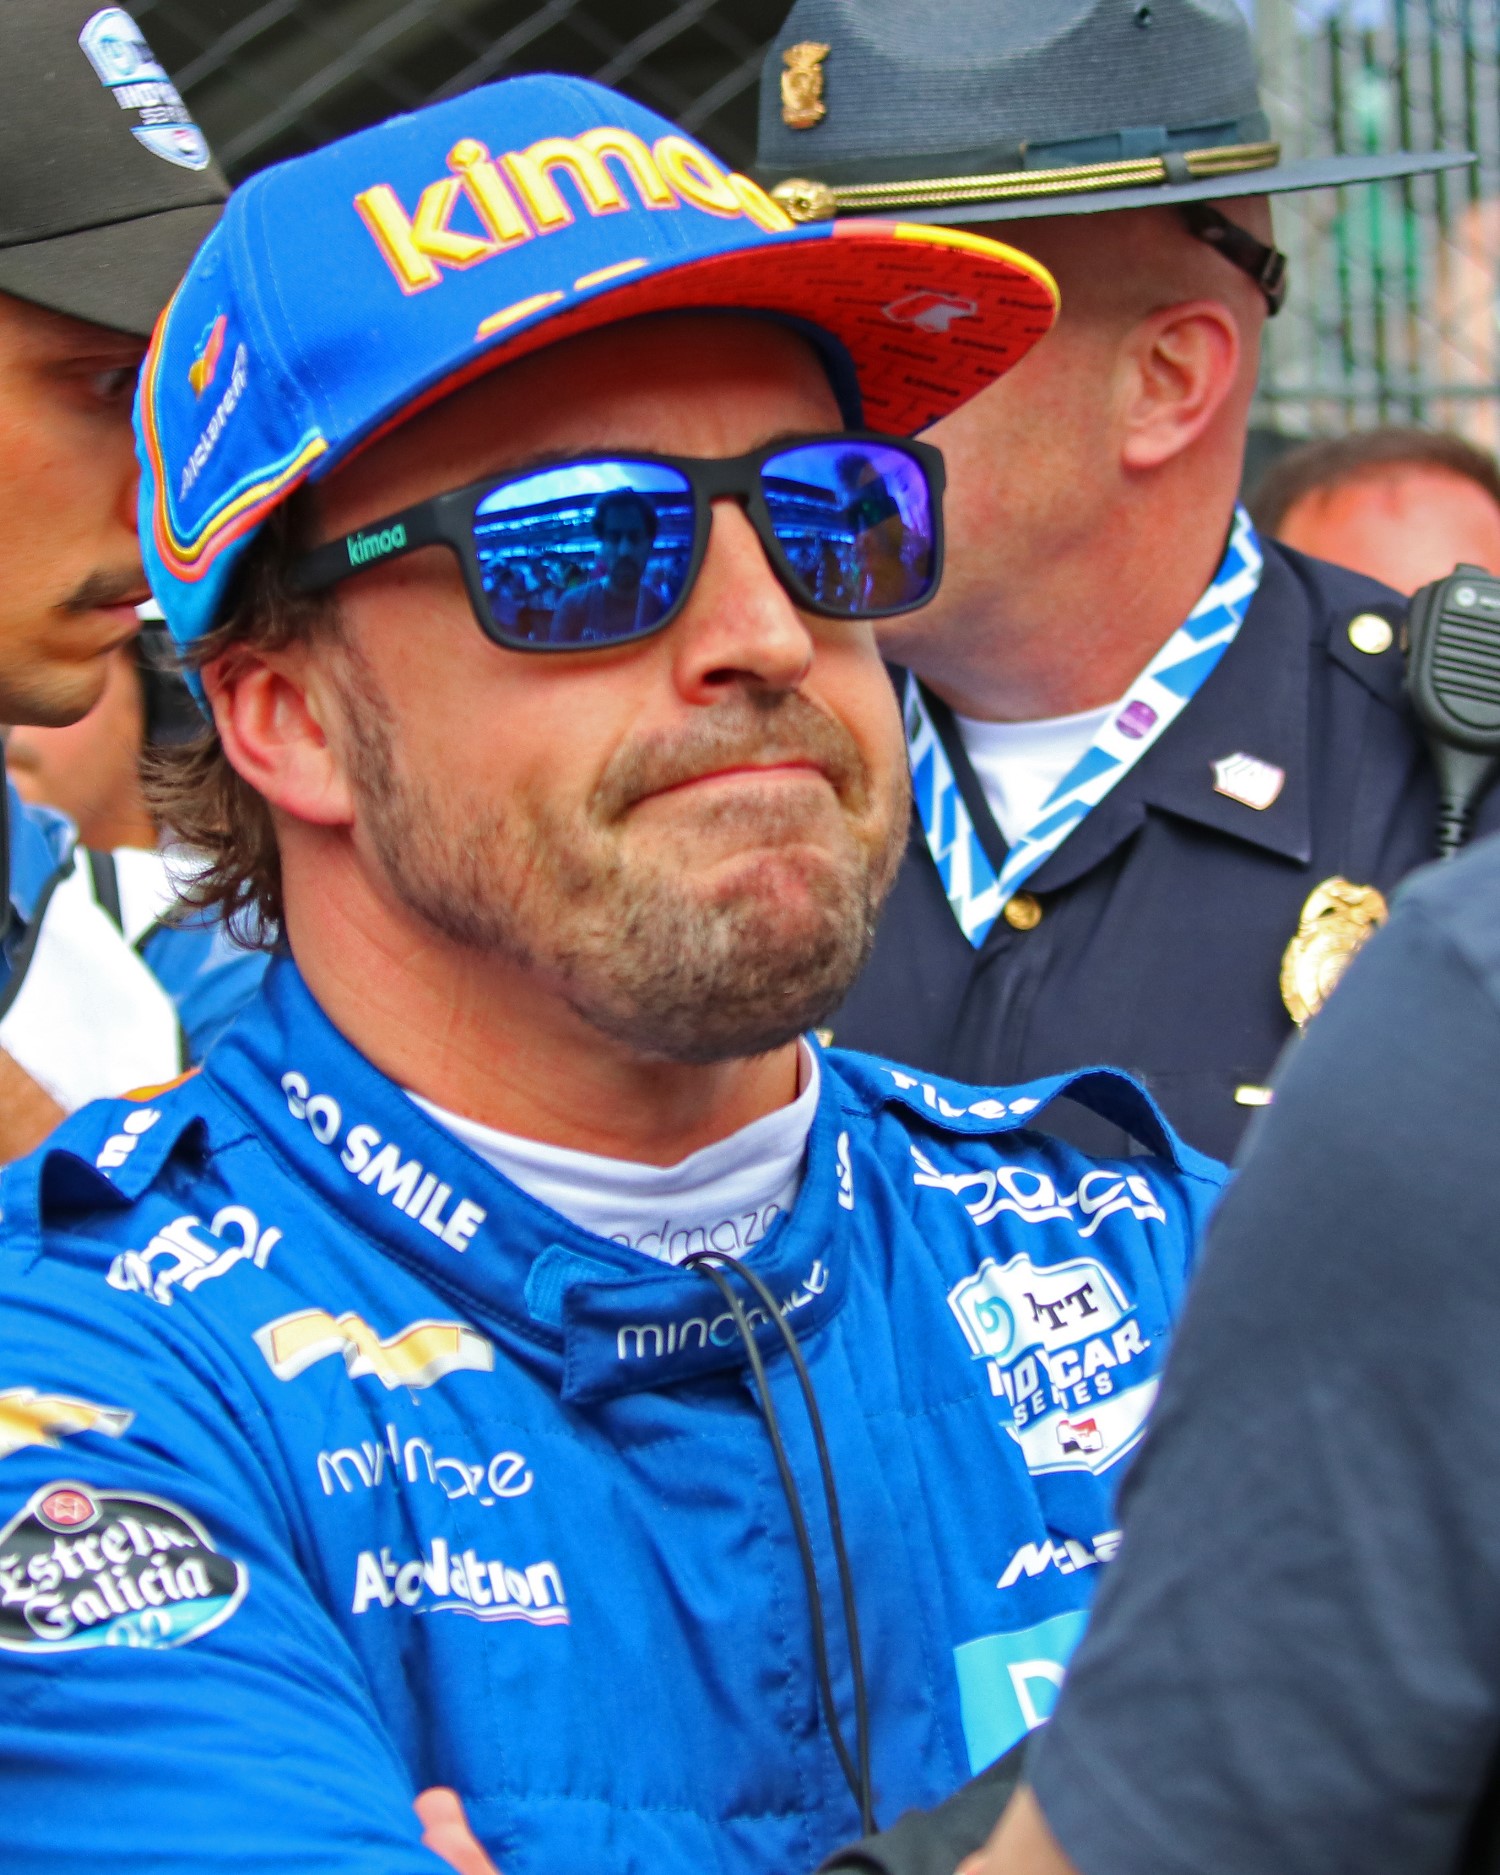 Alonso makes face after getting bumped out